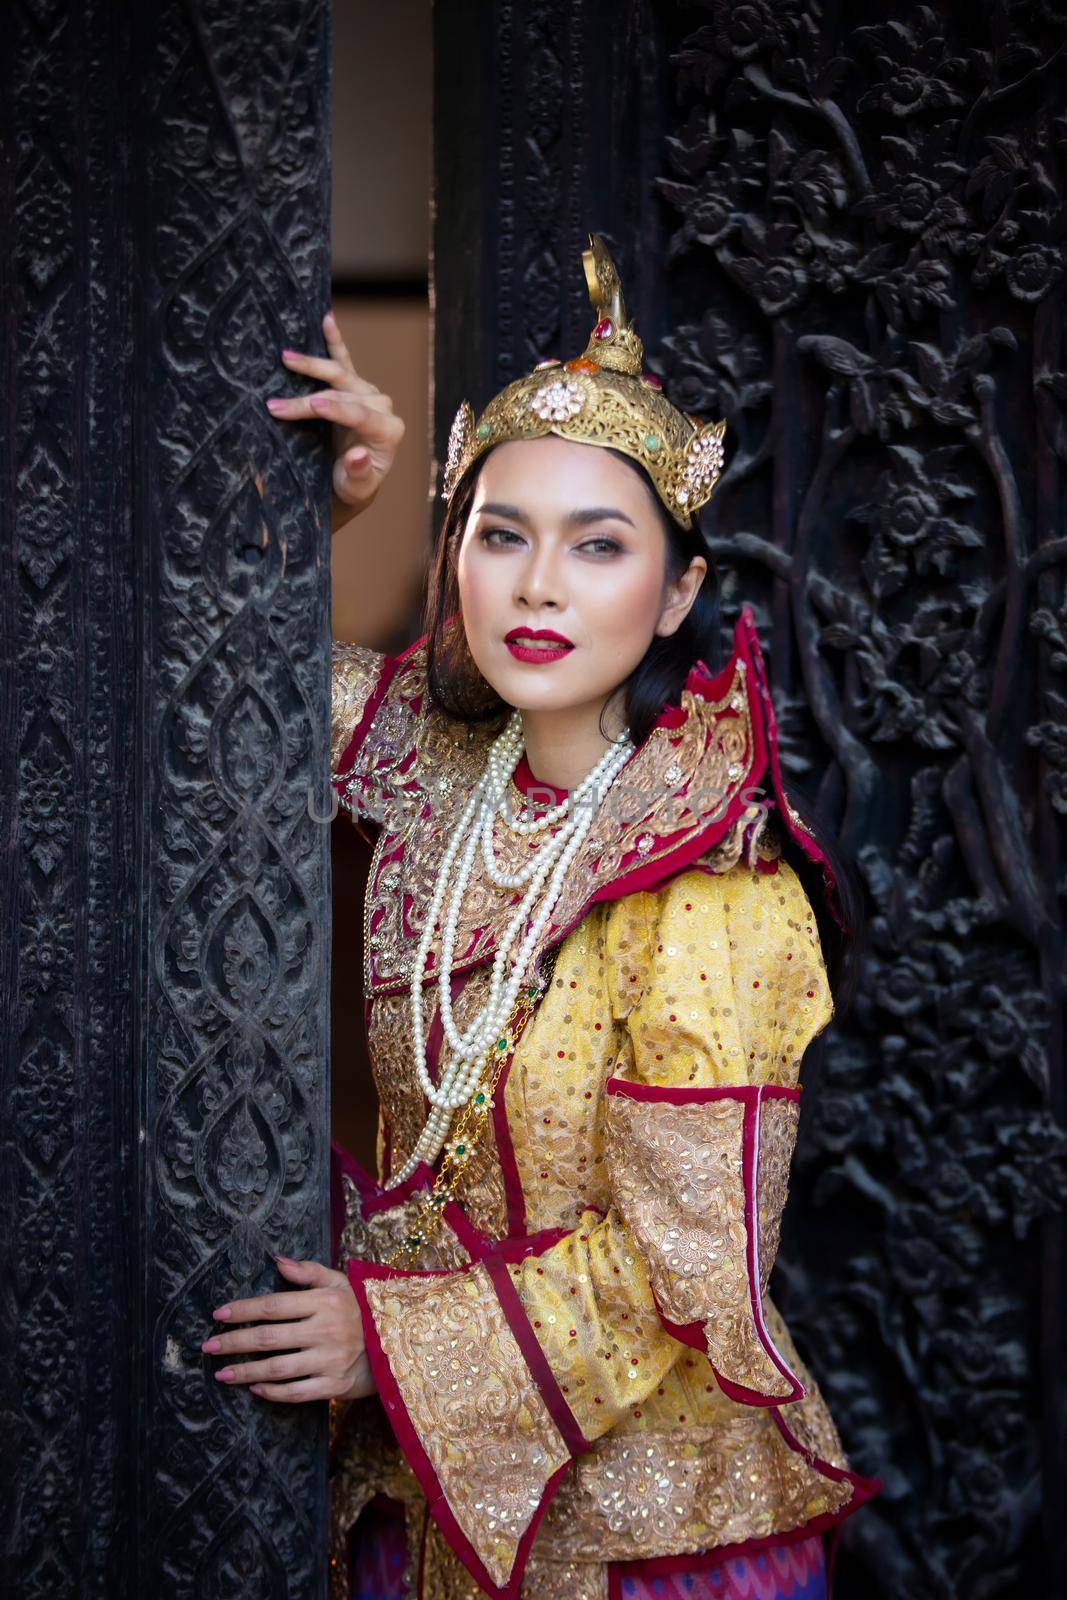 Portrait of an Asian Women in Mandalay, Myanmar Woman with golden Traditional Clothes are Standing Against Art Carving Wooden Door. by chuanchai